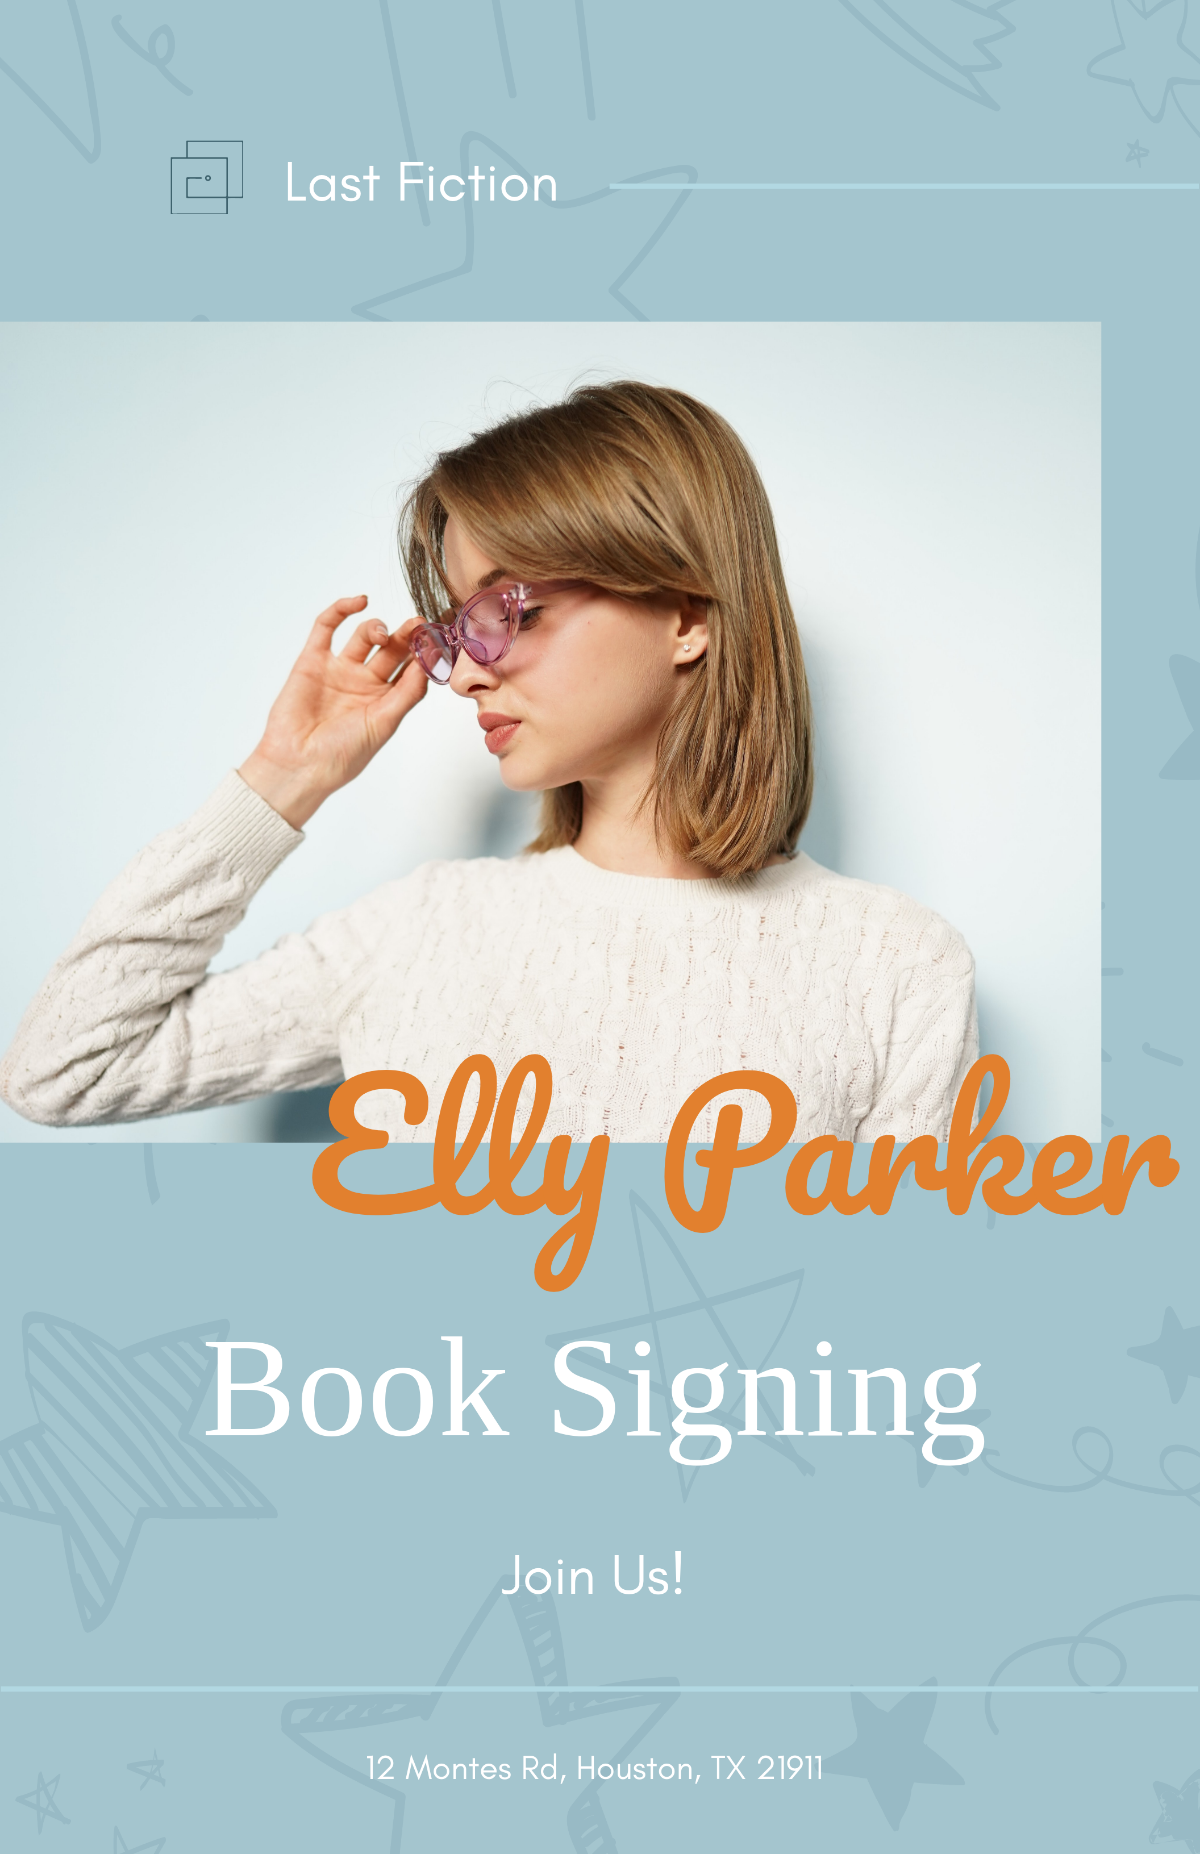 Book Signing Promotion Poster